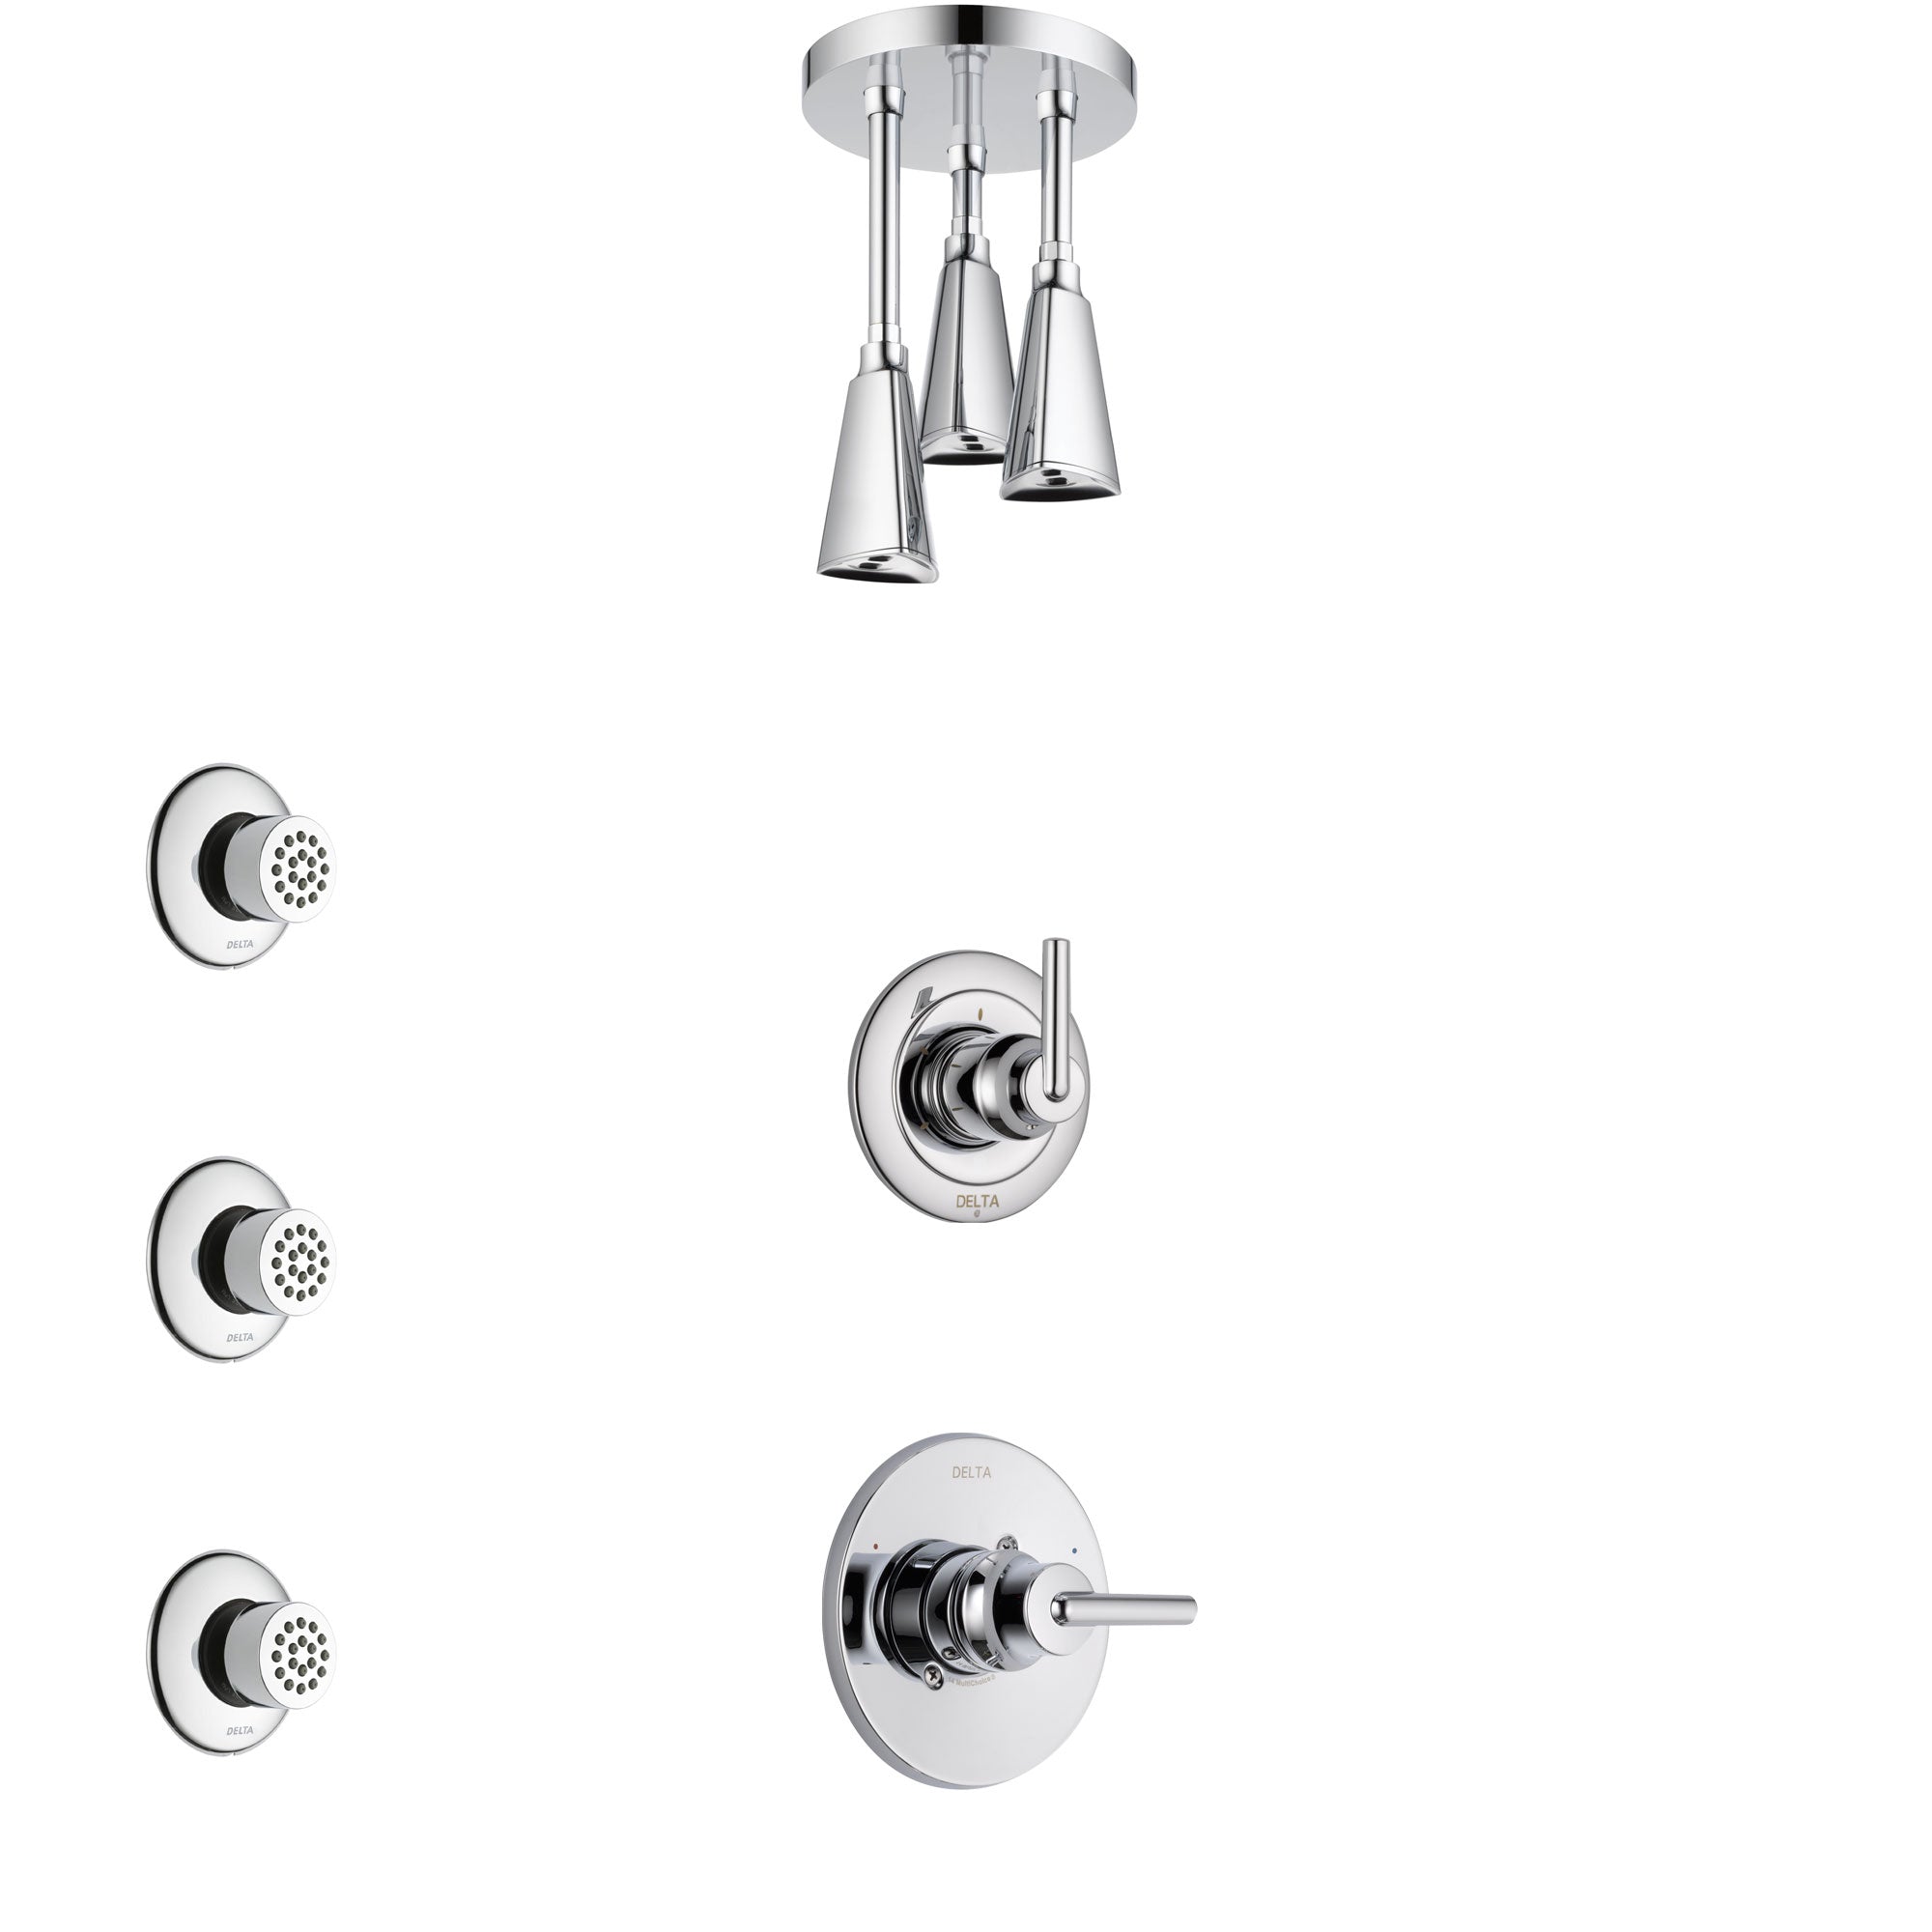 Delta Trinsic Chrome Finish Shower System with Control Handle, 3-Setting Diverter, Ceiling Mount Showerhead, and 3 Body Sprays SS14595